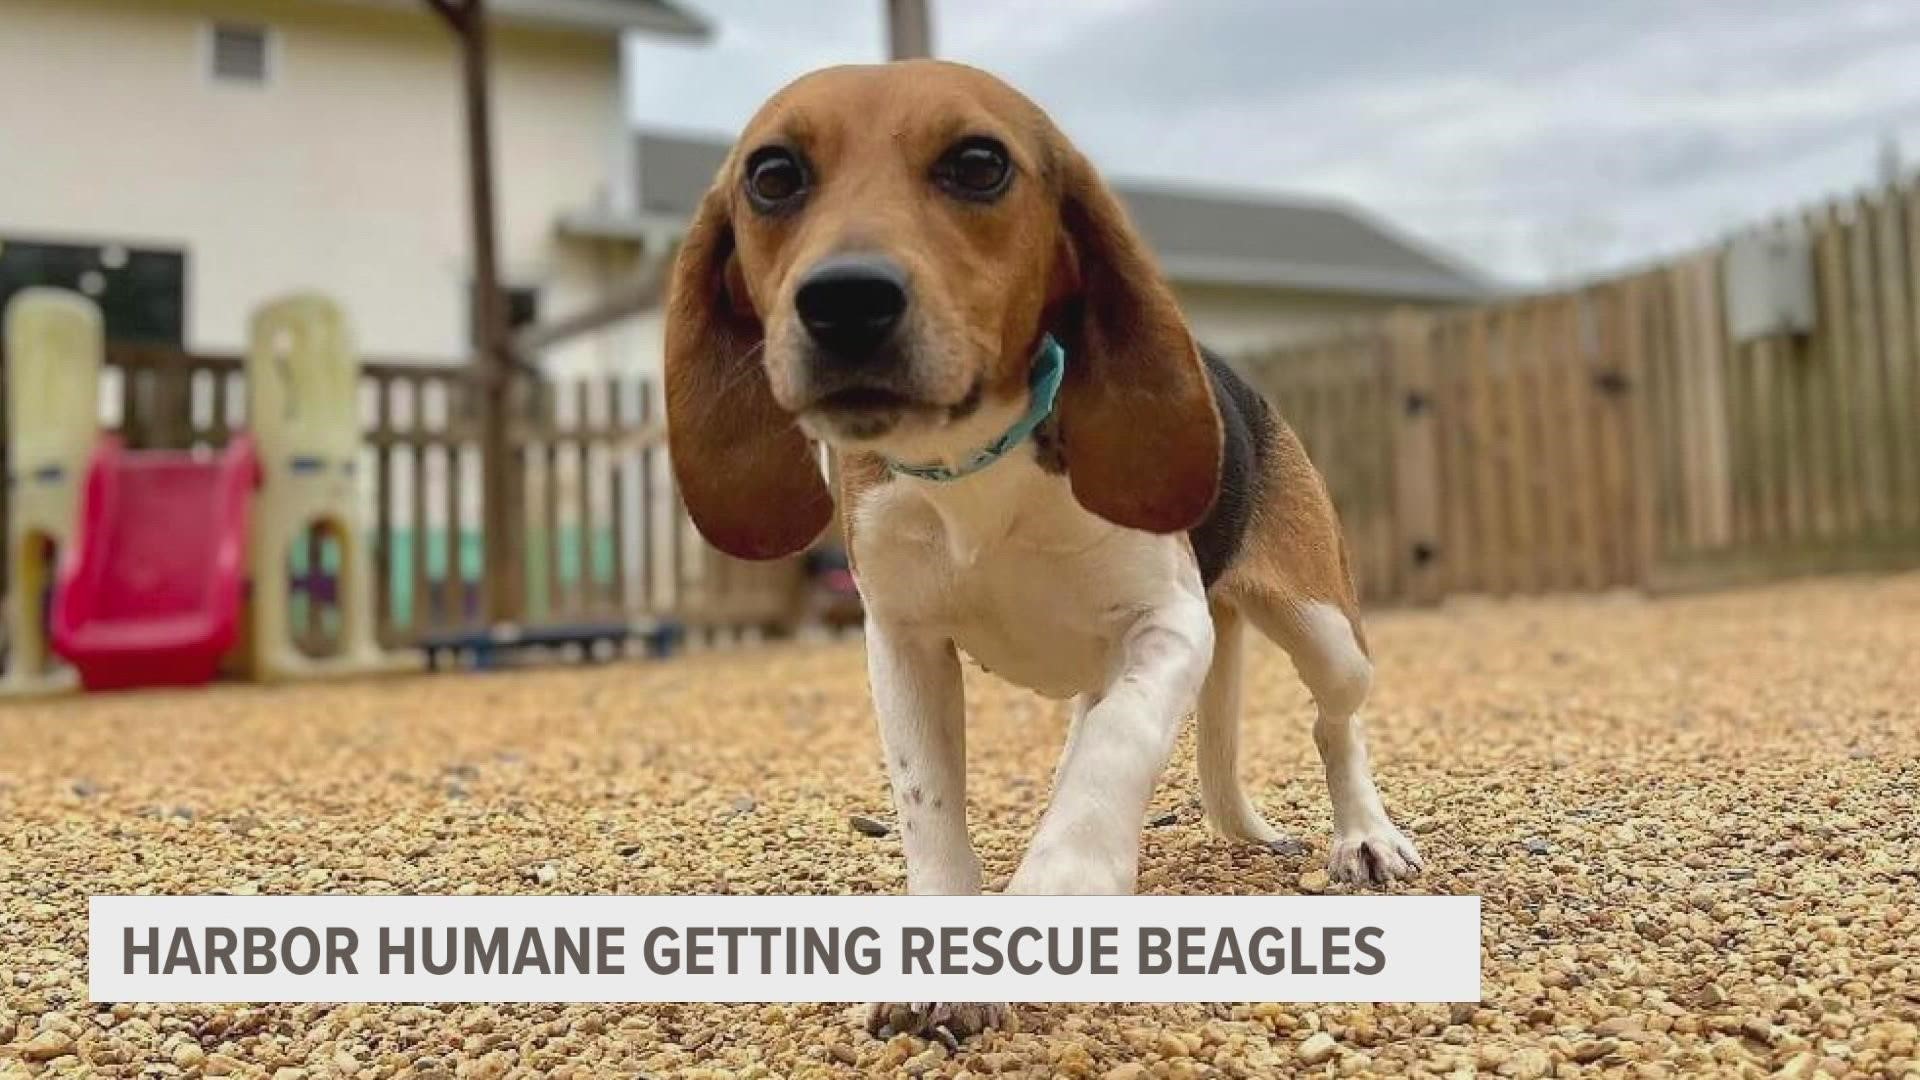 It’s a story that made national headlines about 4,000 dogs saved from a facility where numerous animal welfare violations were found.